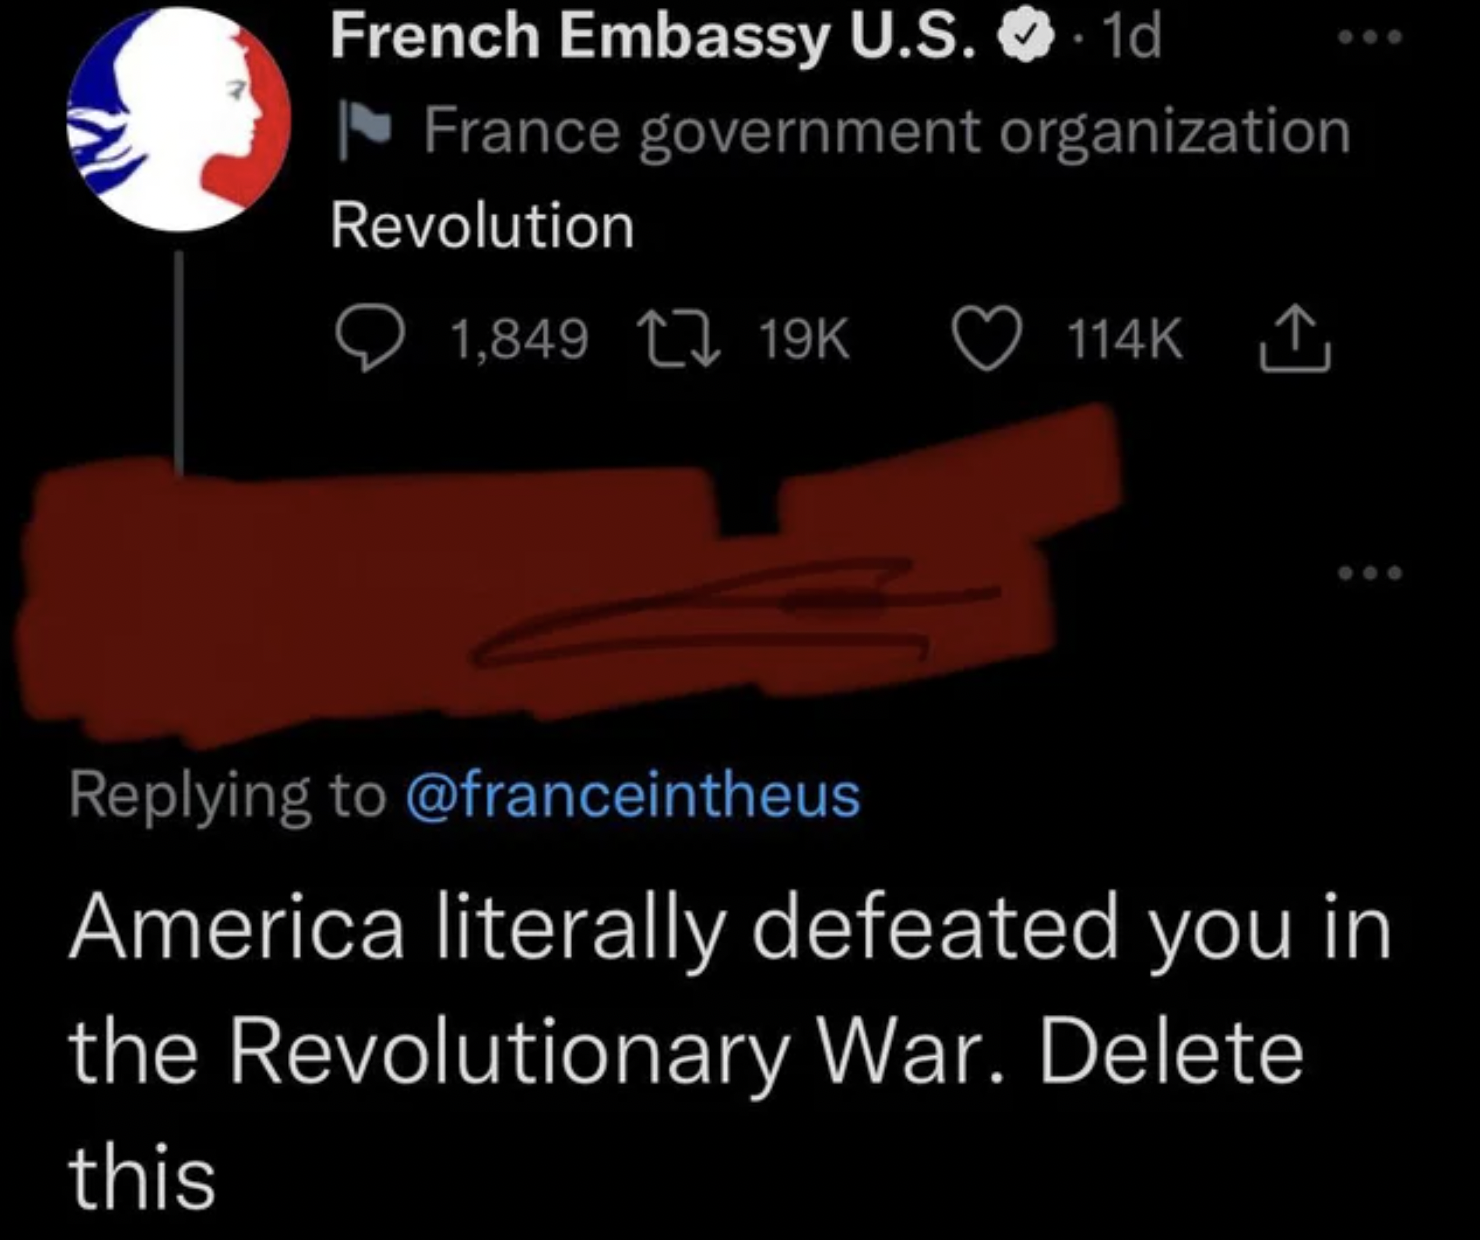 Confidently Incorrect - France government organization Revolution 1, America literally defeated you in the Revolutionary War. Delete this